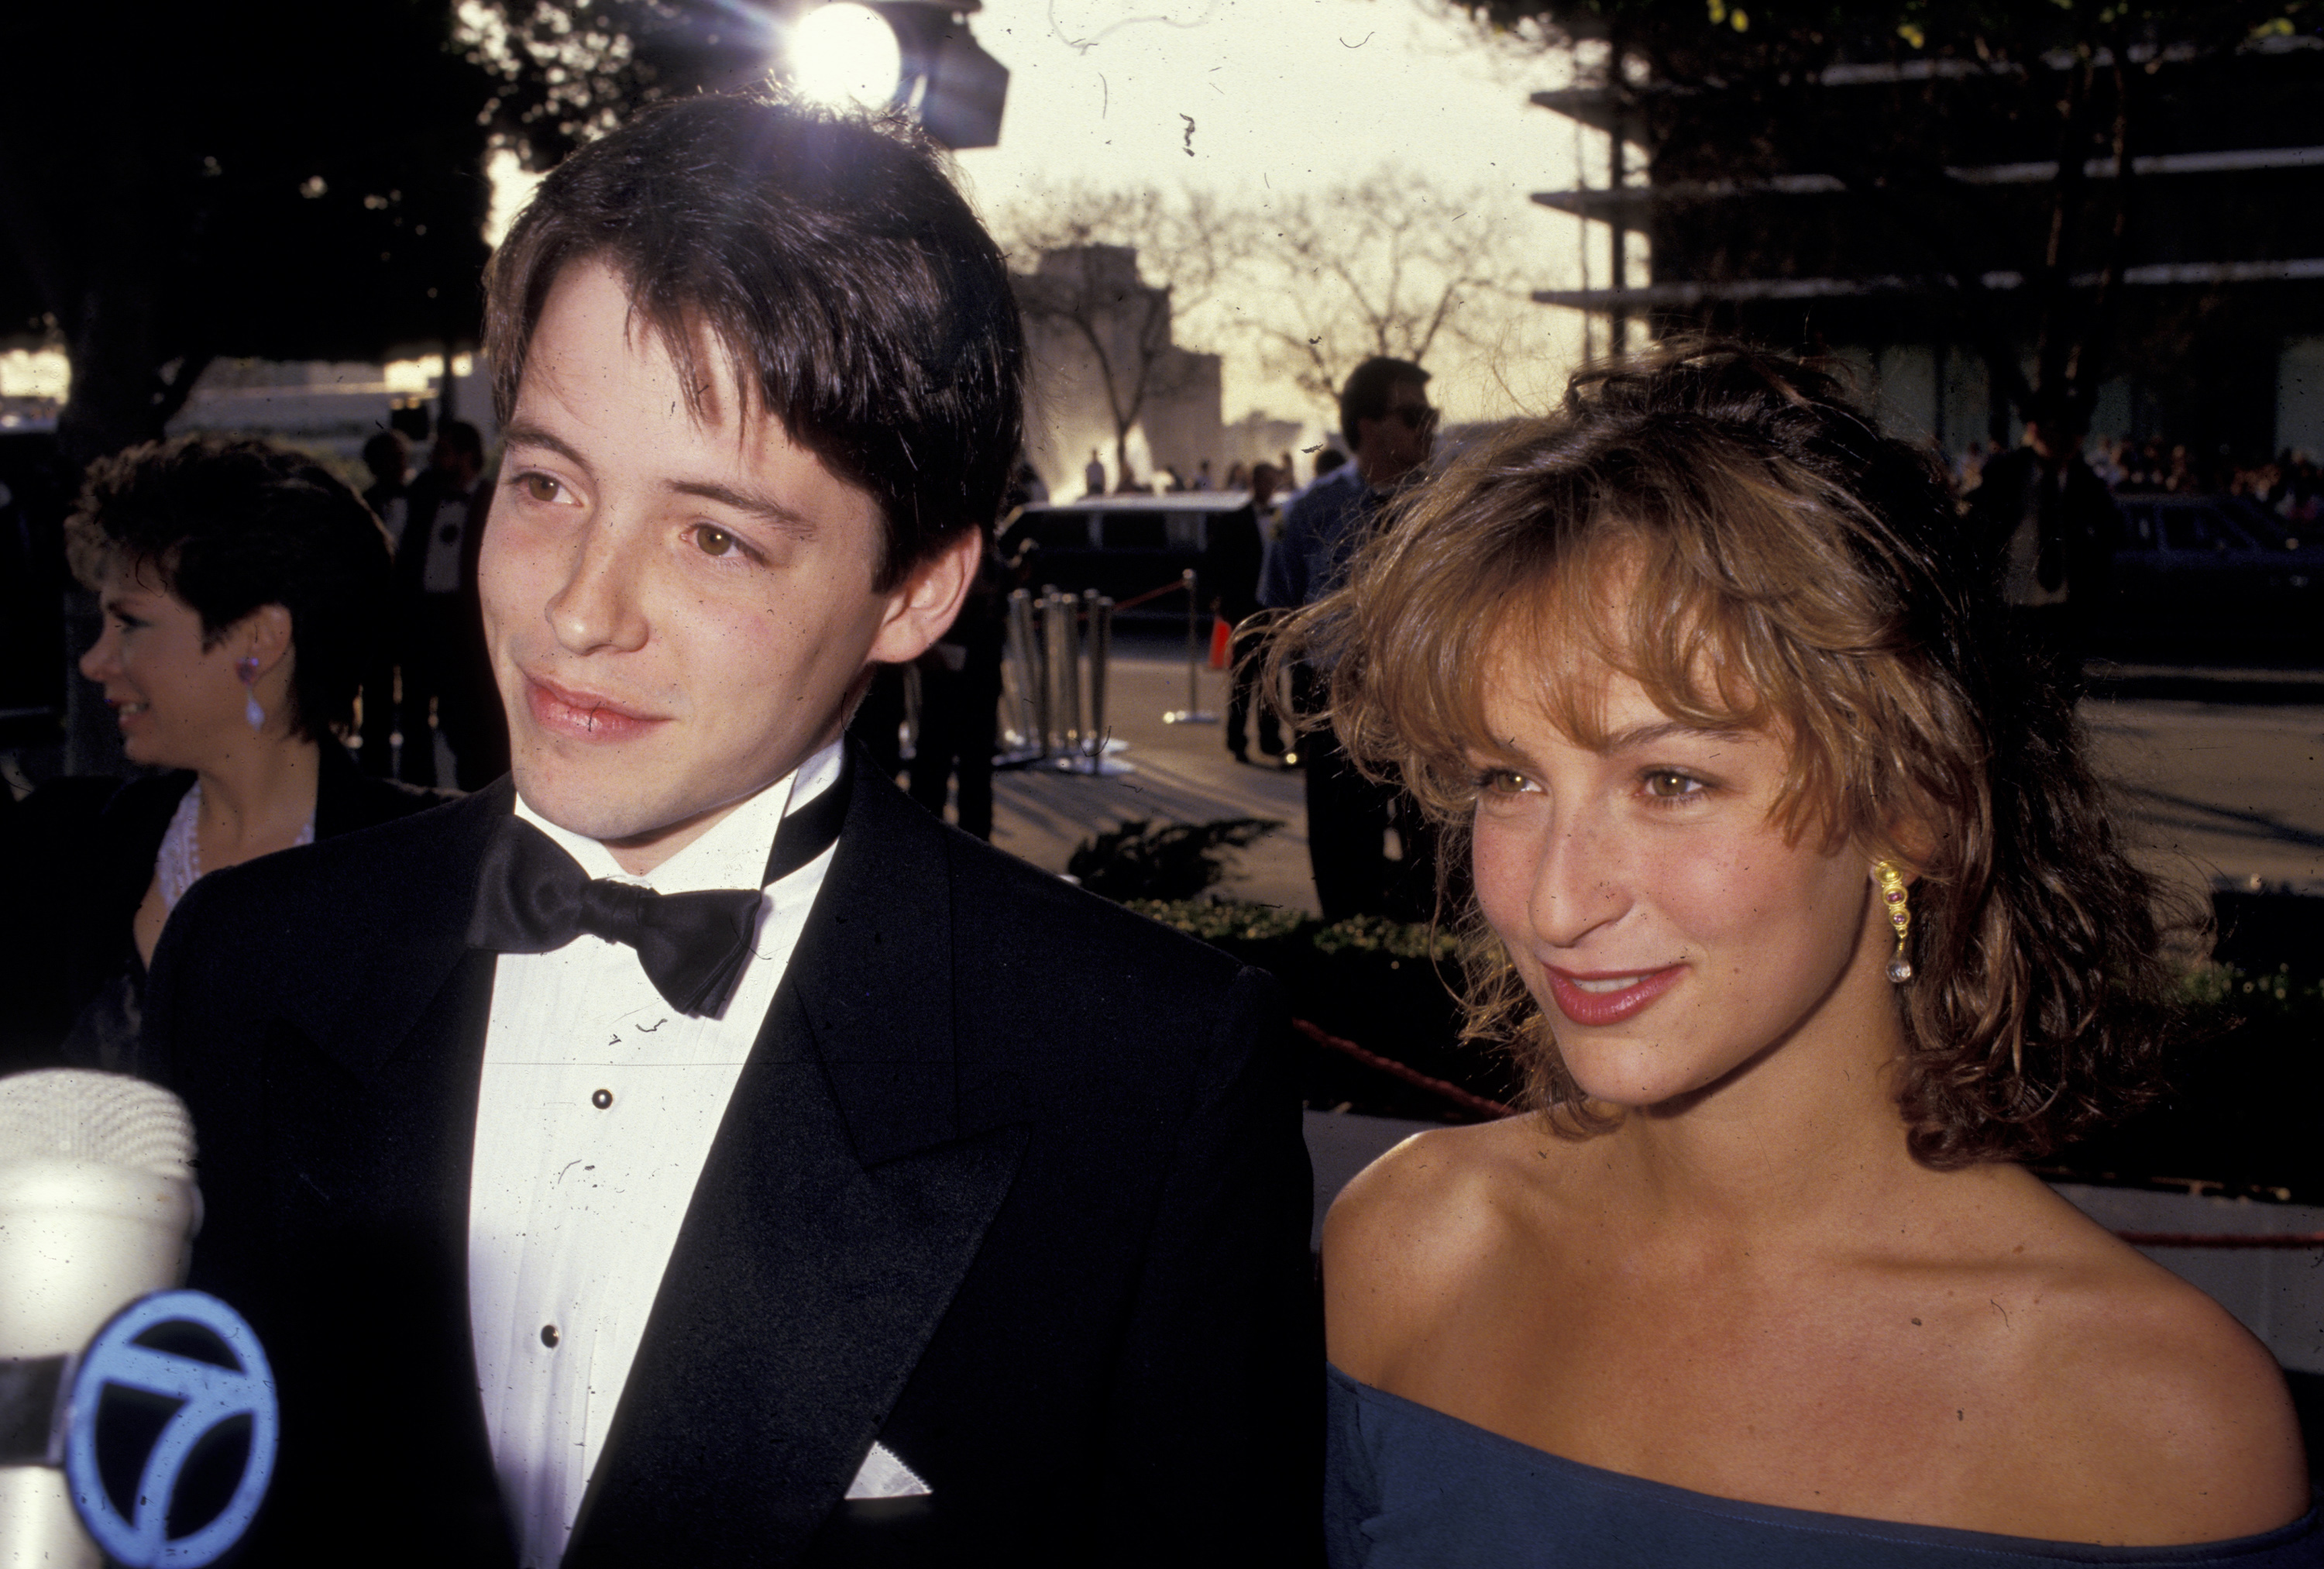 Matthew Broderick and Jennifer Grey on the red carpet.